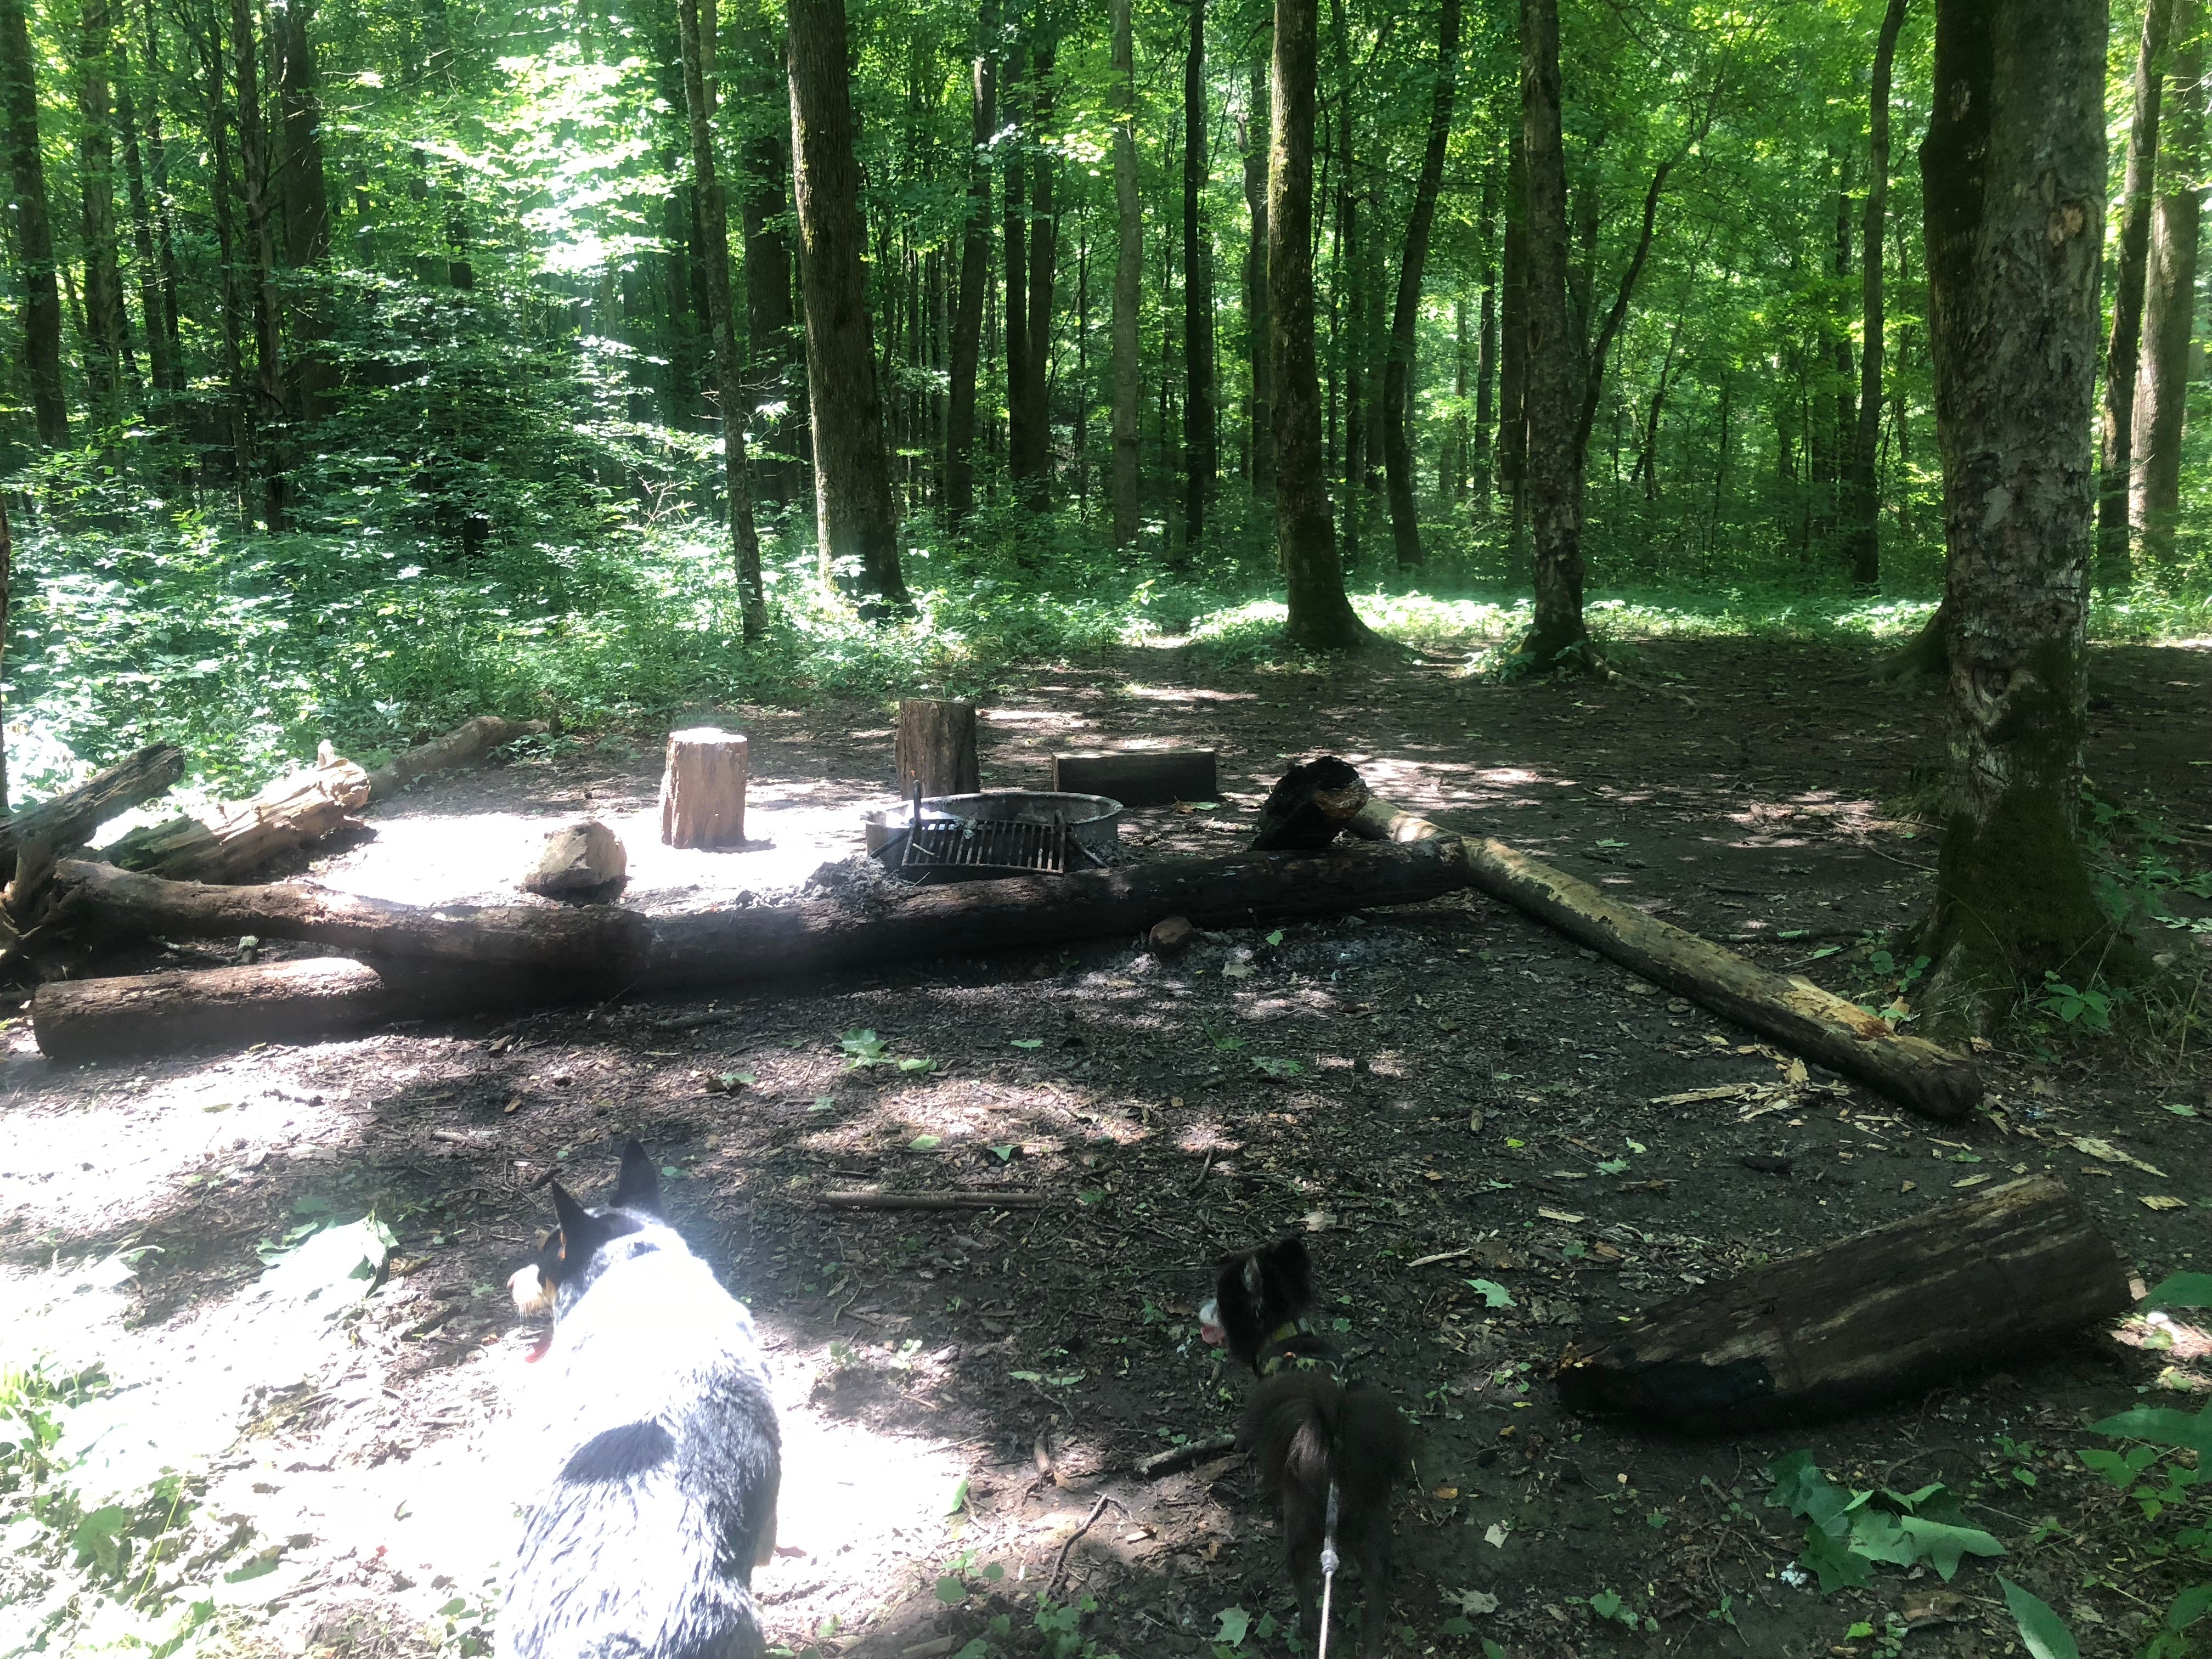 One of the sites in the woods, goodfor tent or hammock . Bring a sling bag for your foodstuff